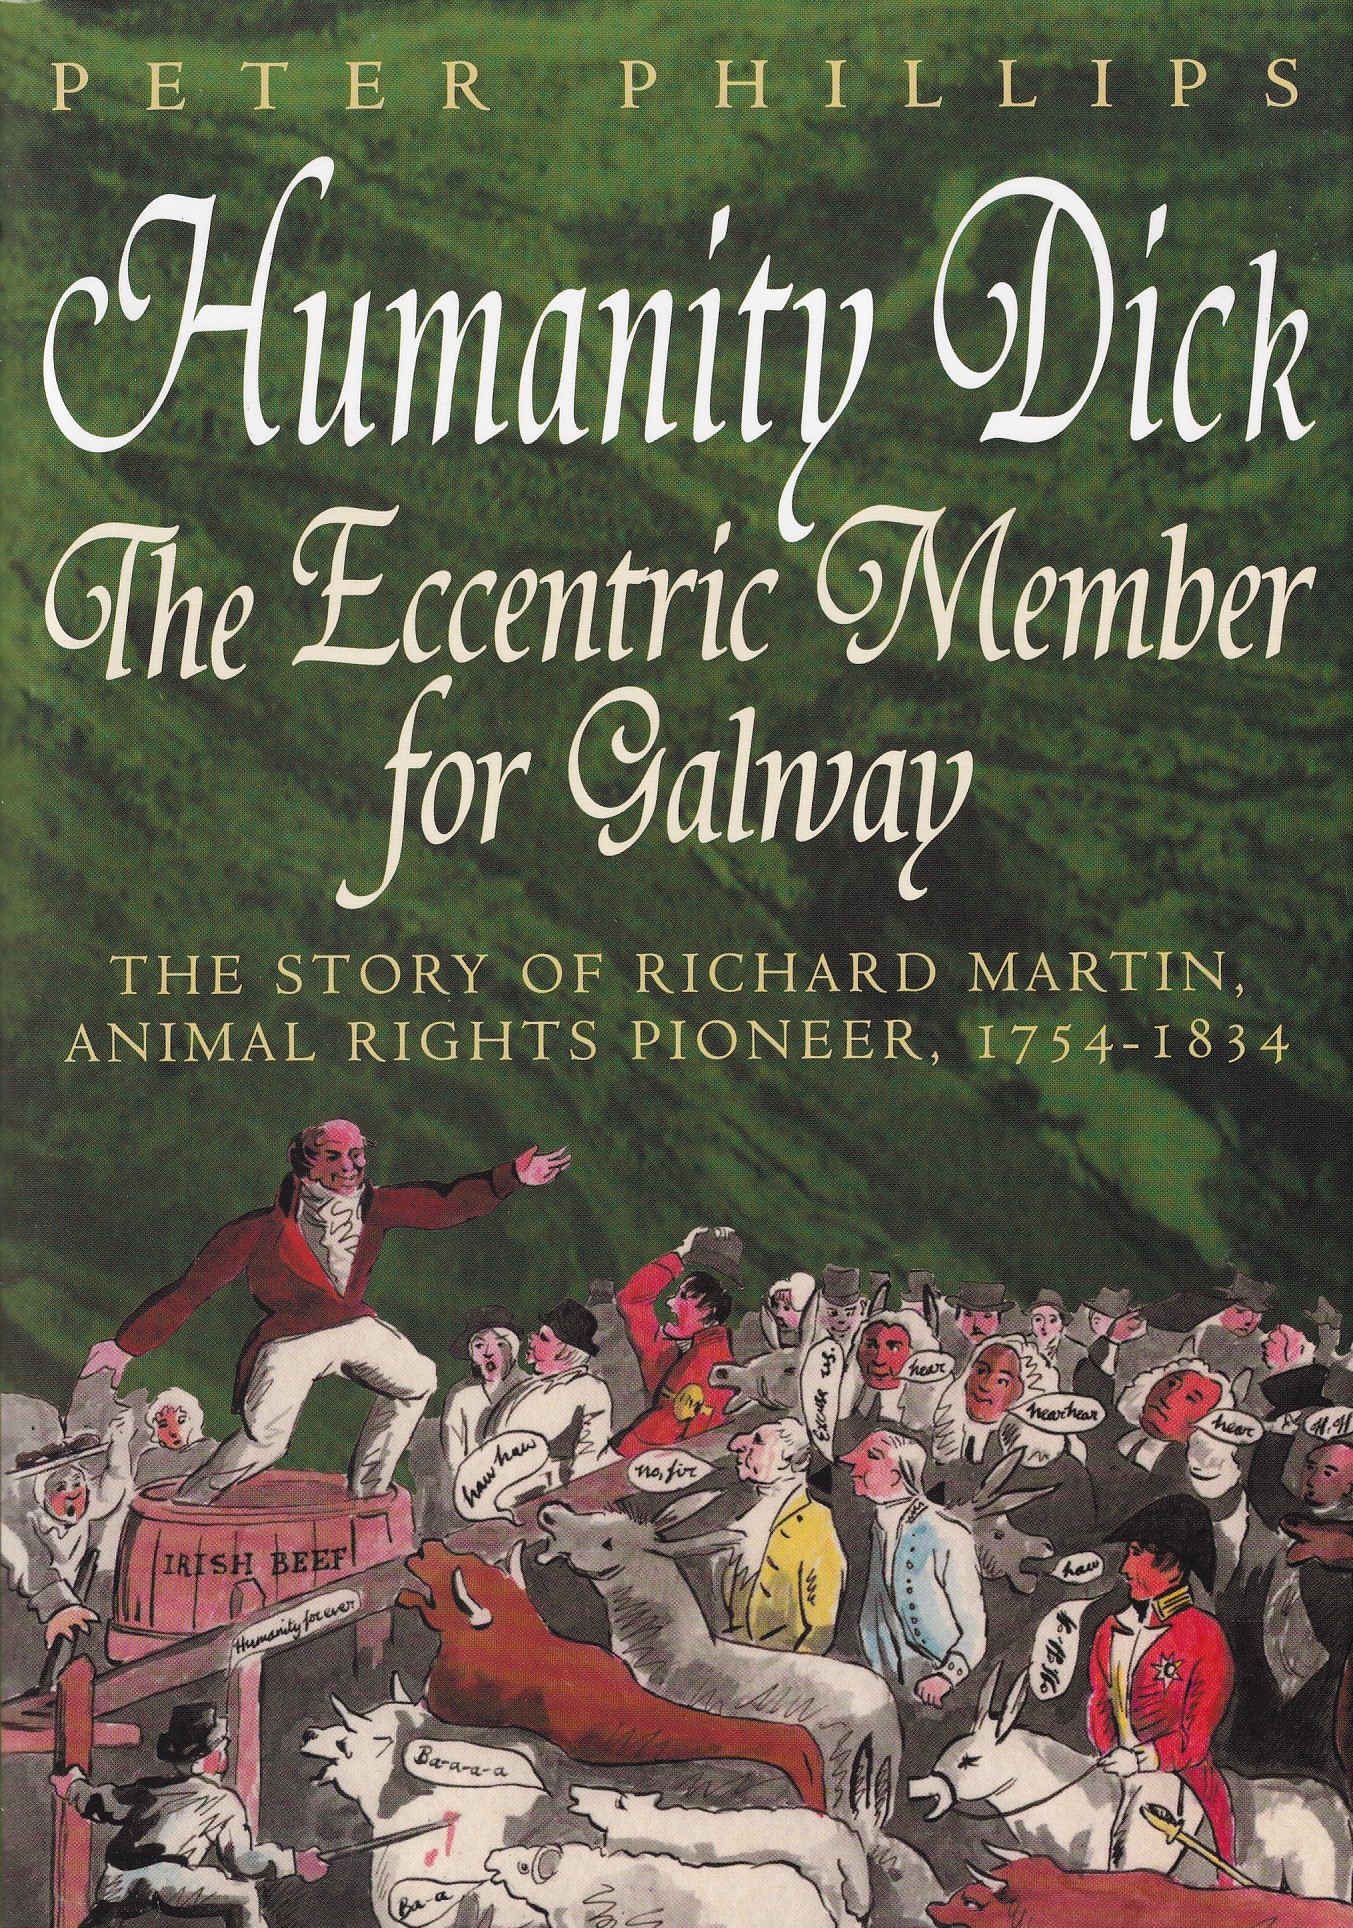 Humanity Dick: The Eccentric Member for Galway by Peter Phillips